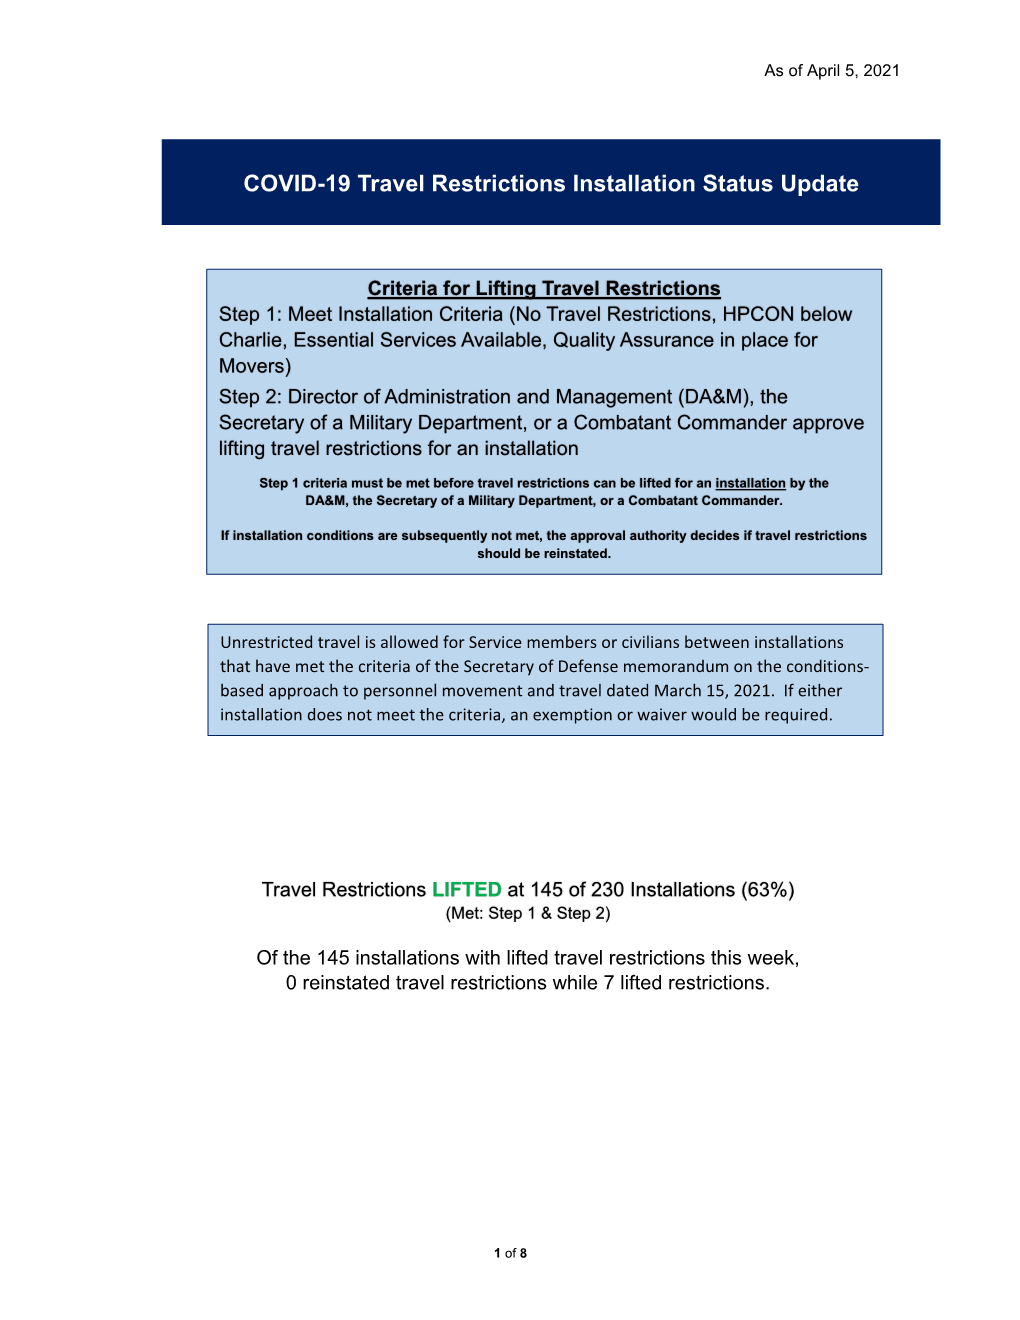 COVID-19 Travel Restrictions Installation Status Update, April 7